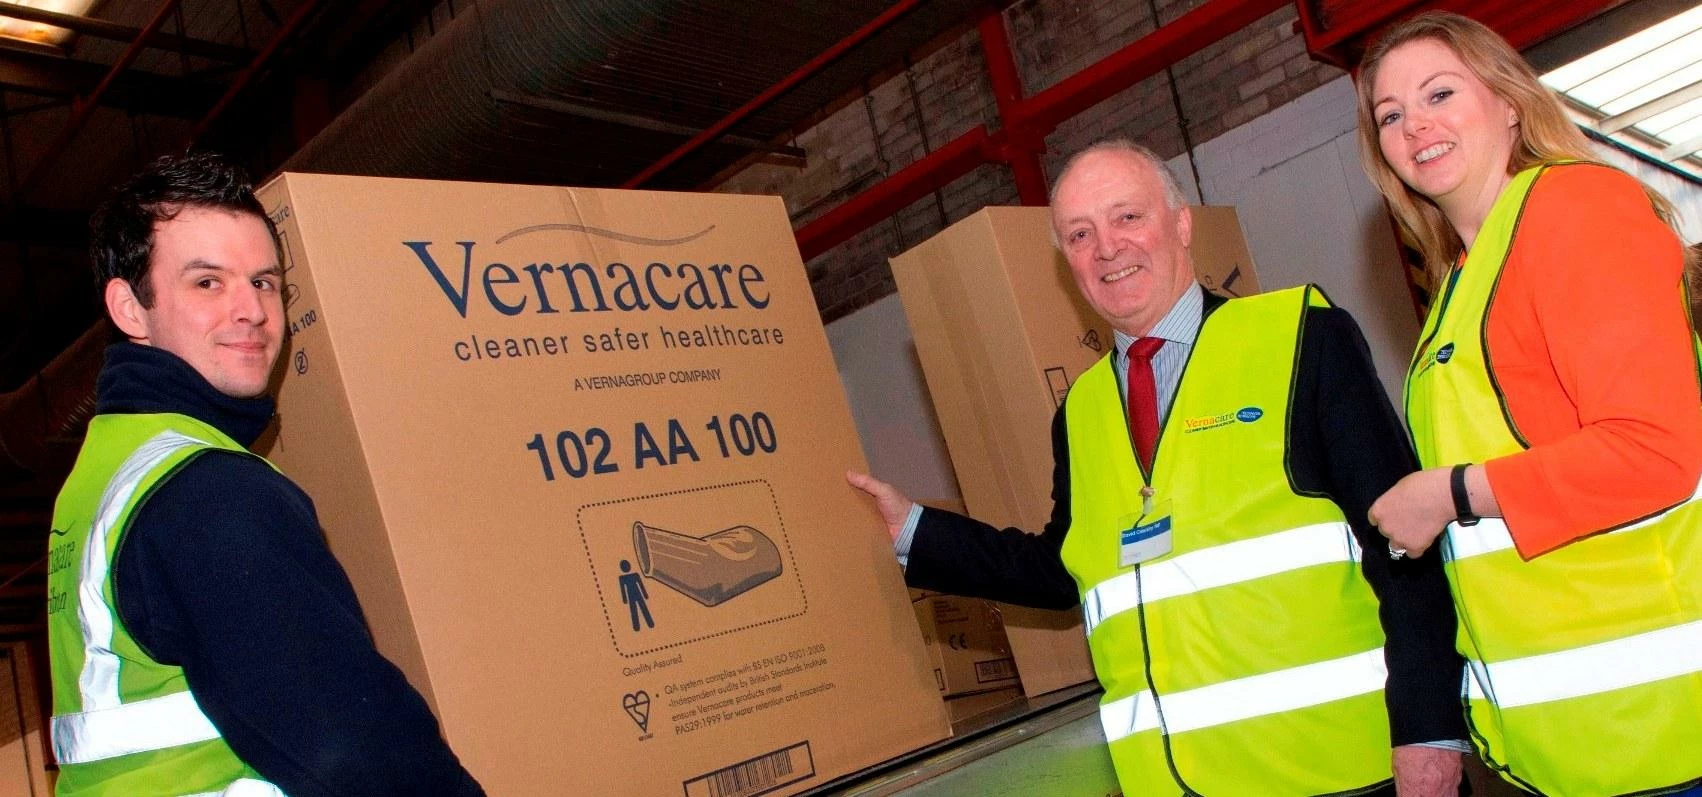 David Crausby MP (centre)  visits the Vernacare factory. He is pictured with Joe Fisher, Distributio